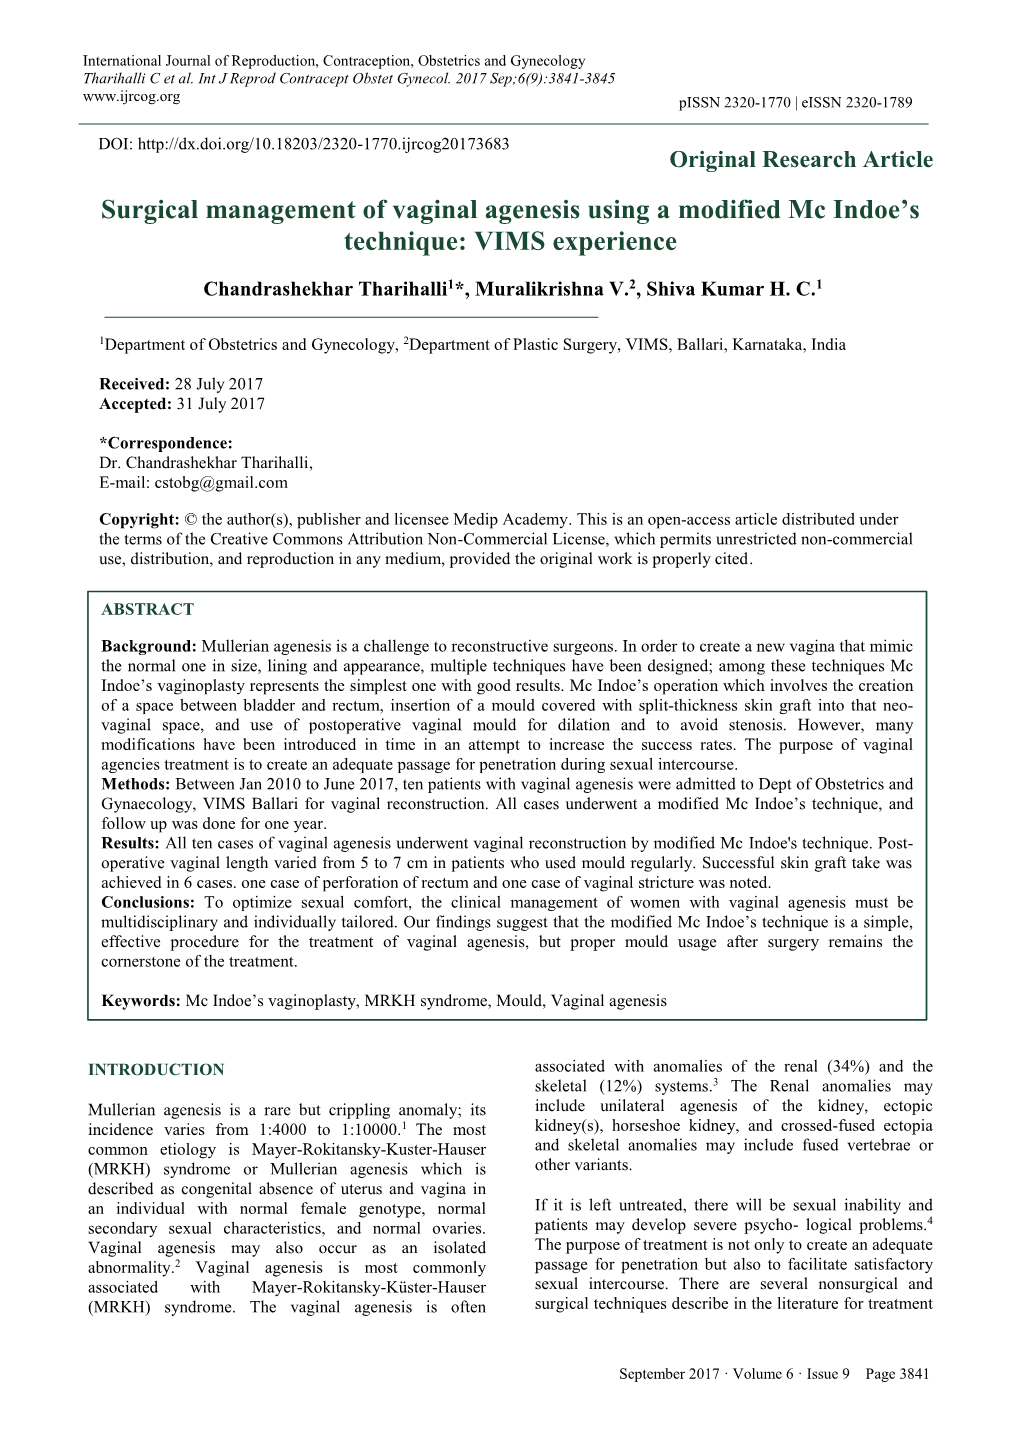 Surgical Management of Vaginal Agenesis Using a Modified Mc Indoe’S Technique: VIMS Experience